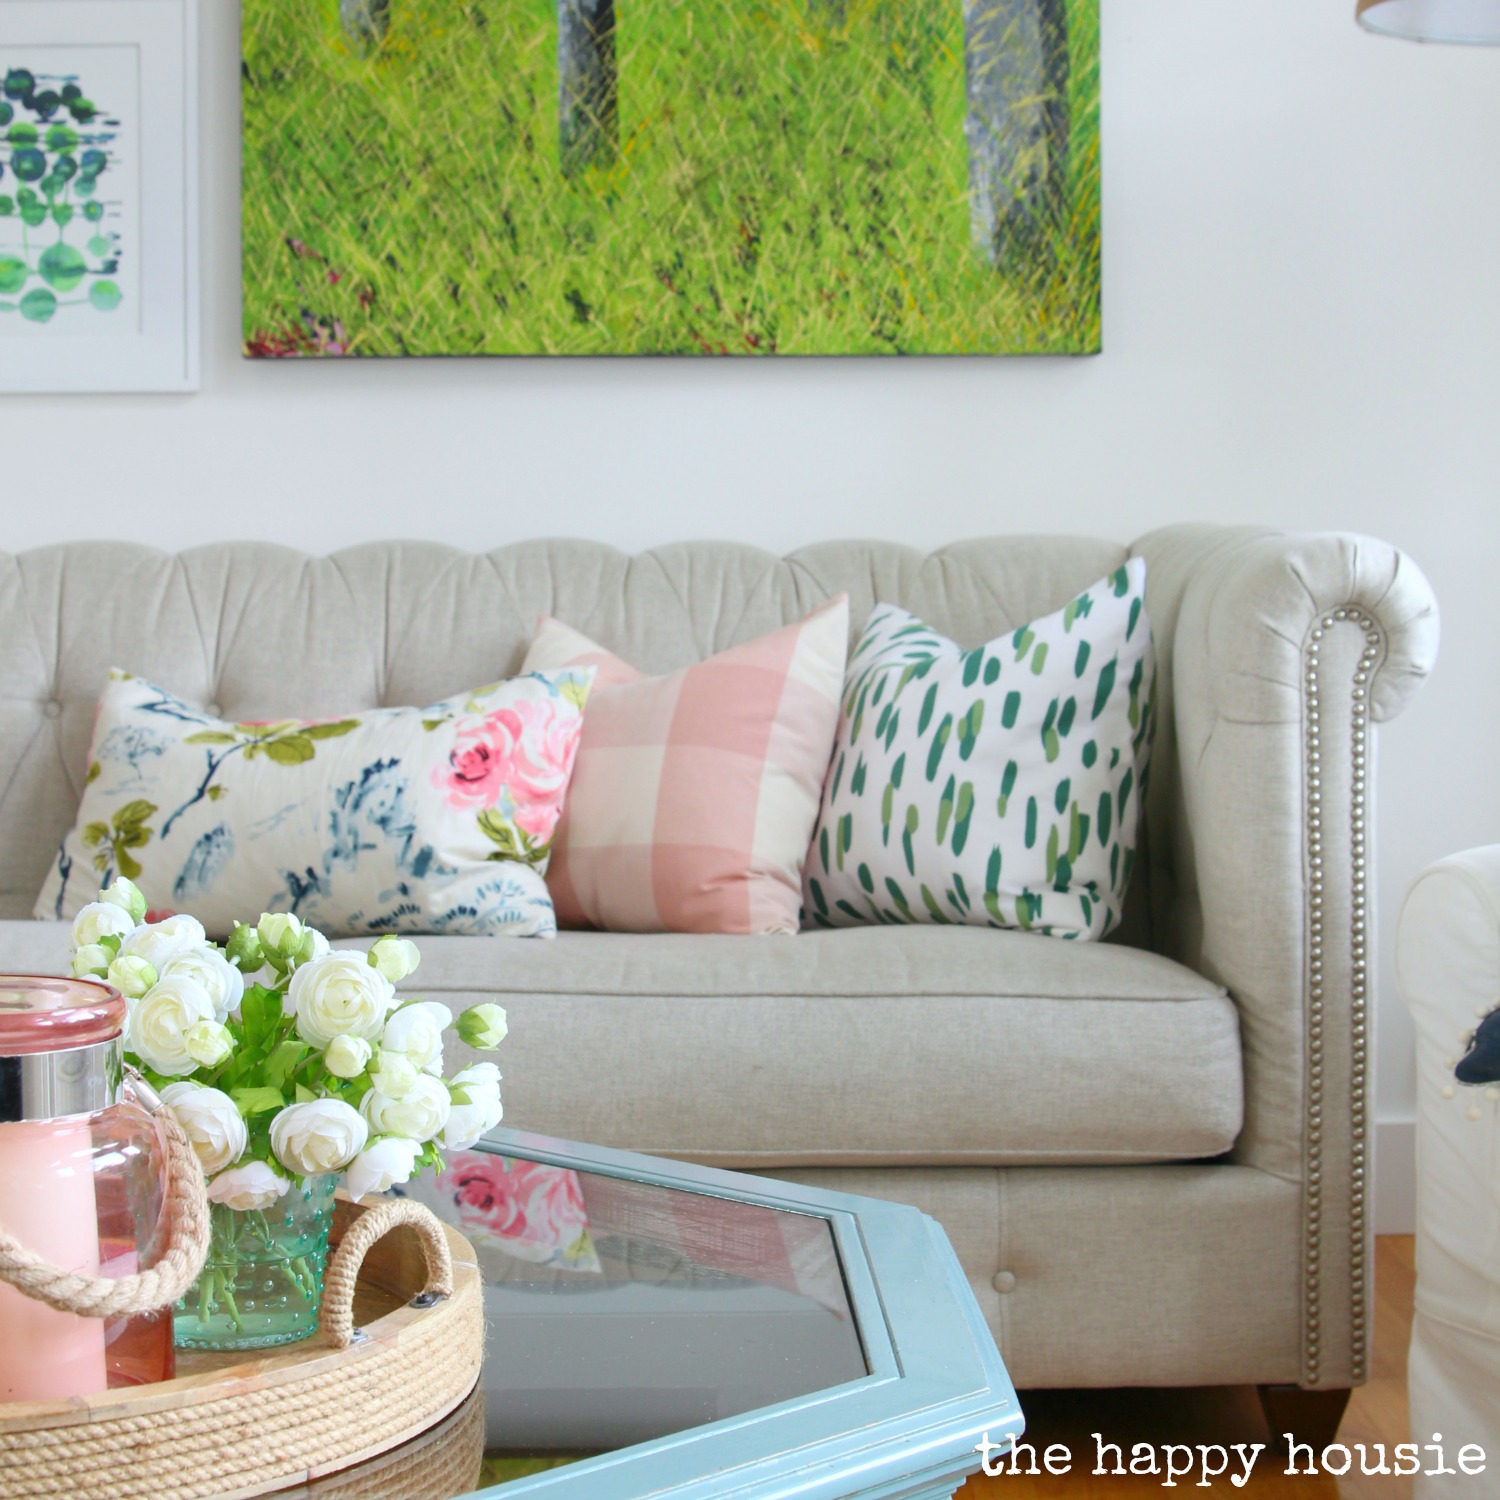 Bright floral and pink pillows on the couch.